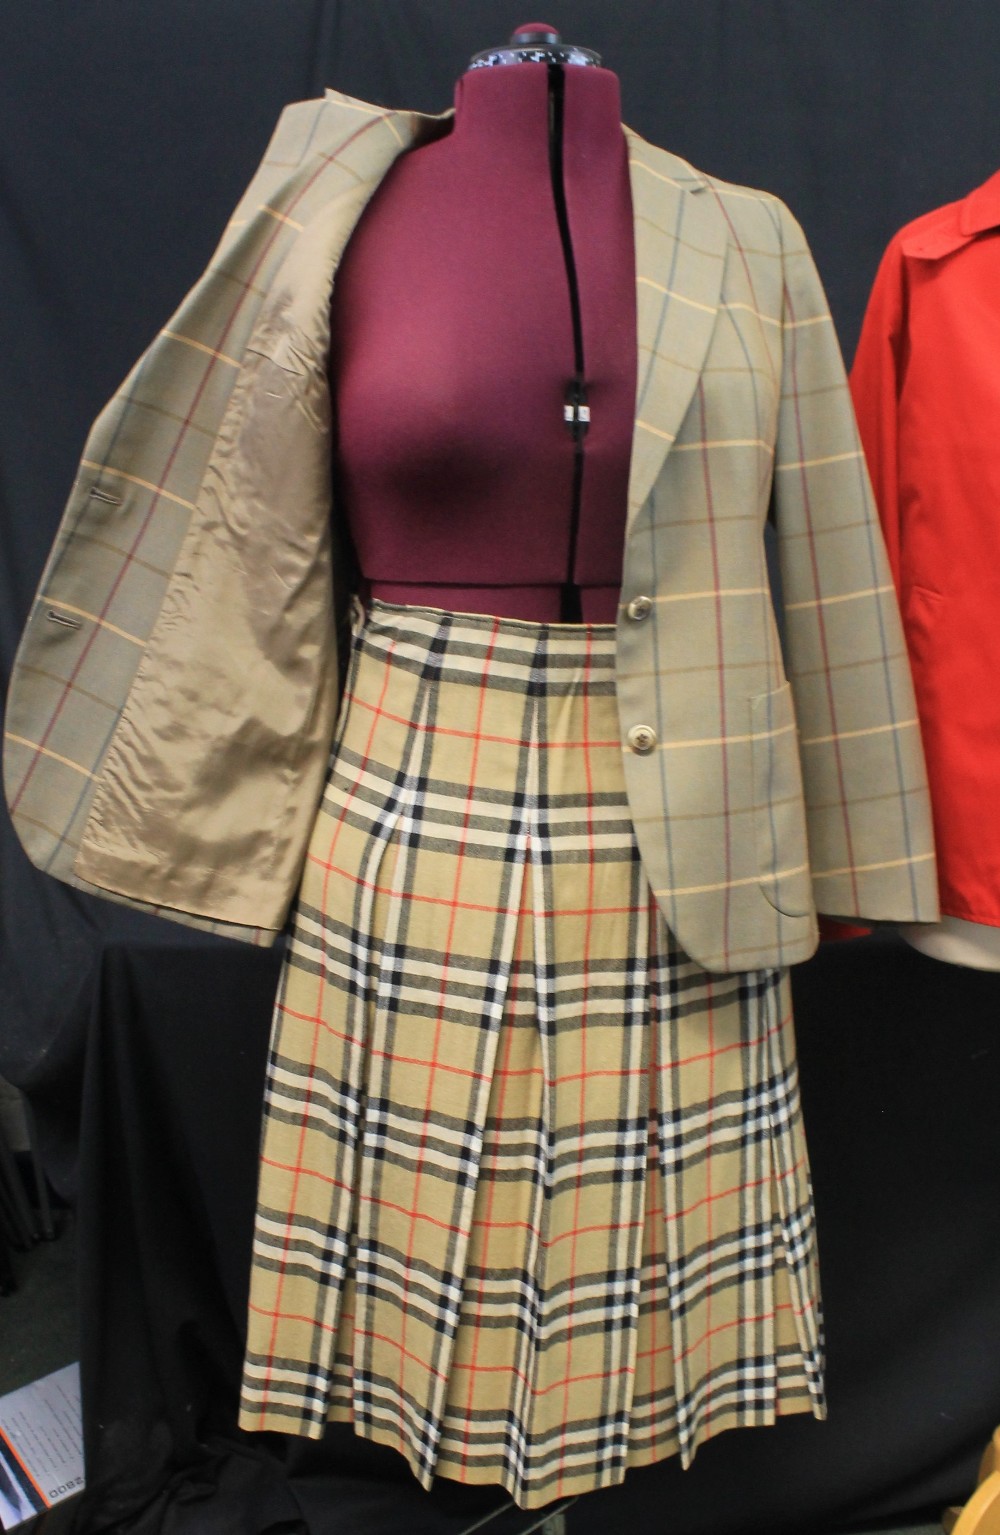 Vintage 1970's-80's Burberry items to include: red Burberrys' cotton blend jacket with plaid lining, - Image 2 of 5